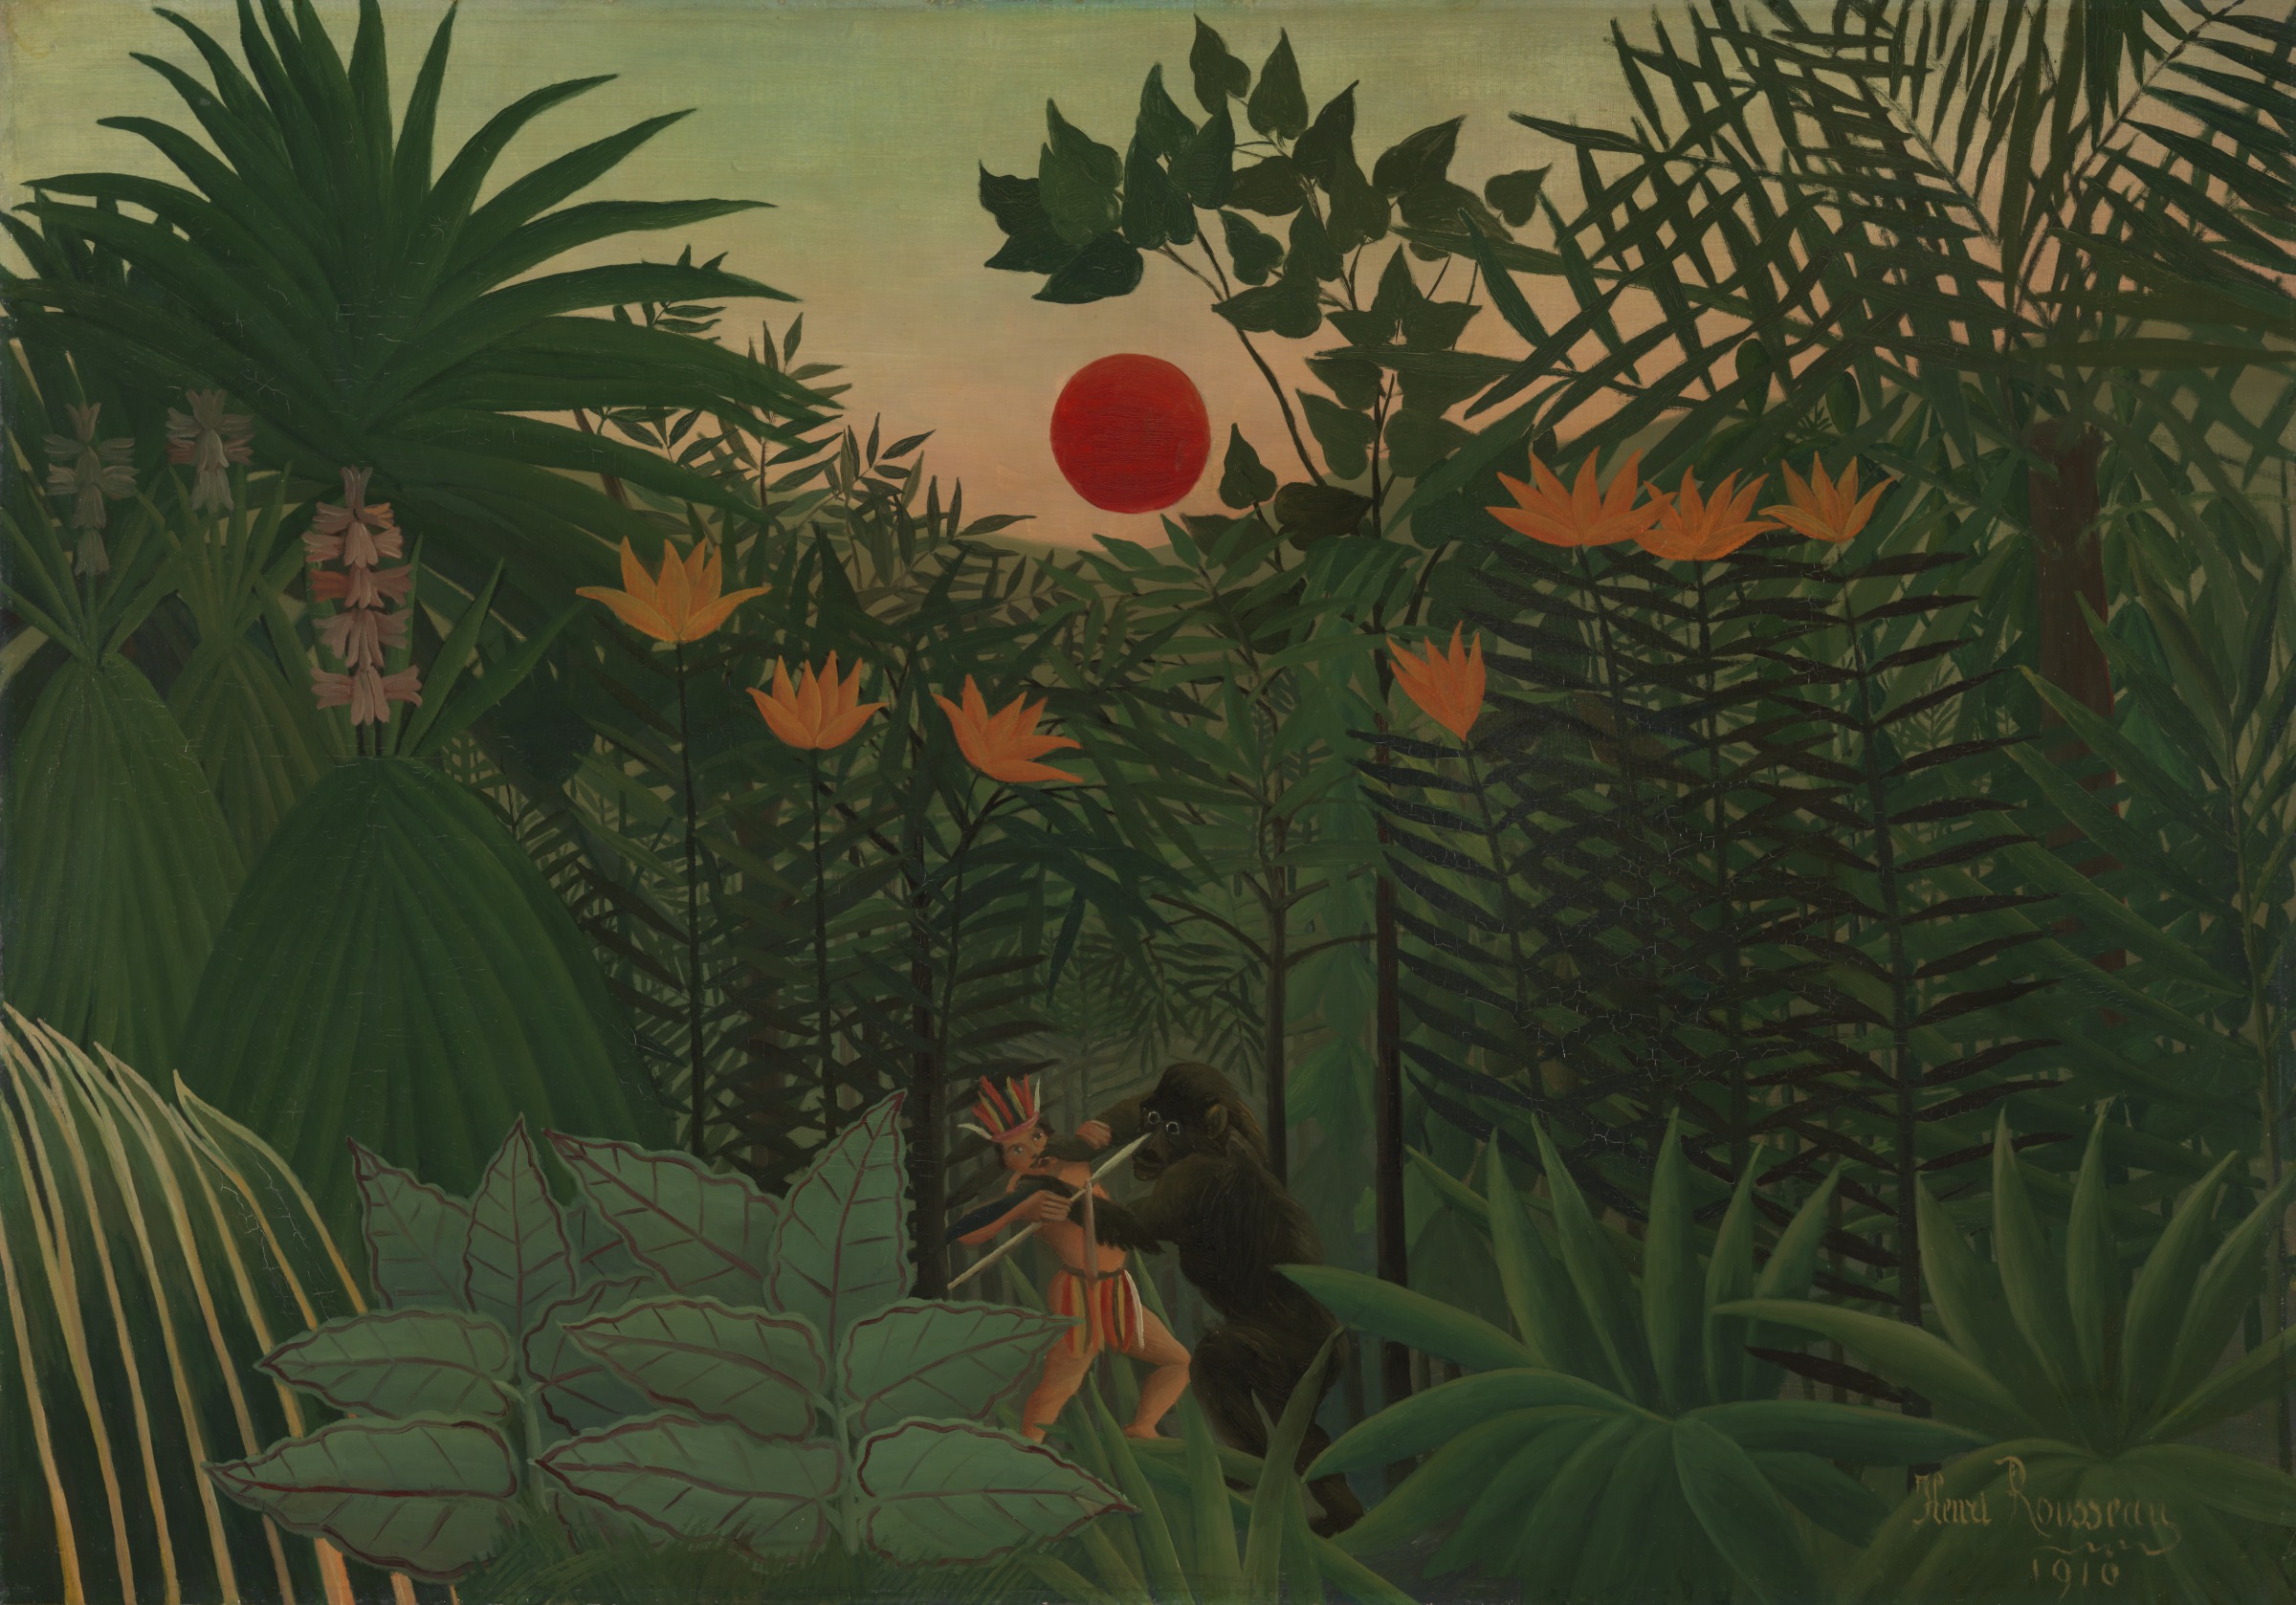 Tropical Landscape - An American Indian Struggling with a Gorilla by Henri Rousseau - 1910 - 44 3/4 x 64 in. Virginia Museum of Fine Arts